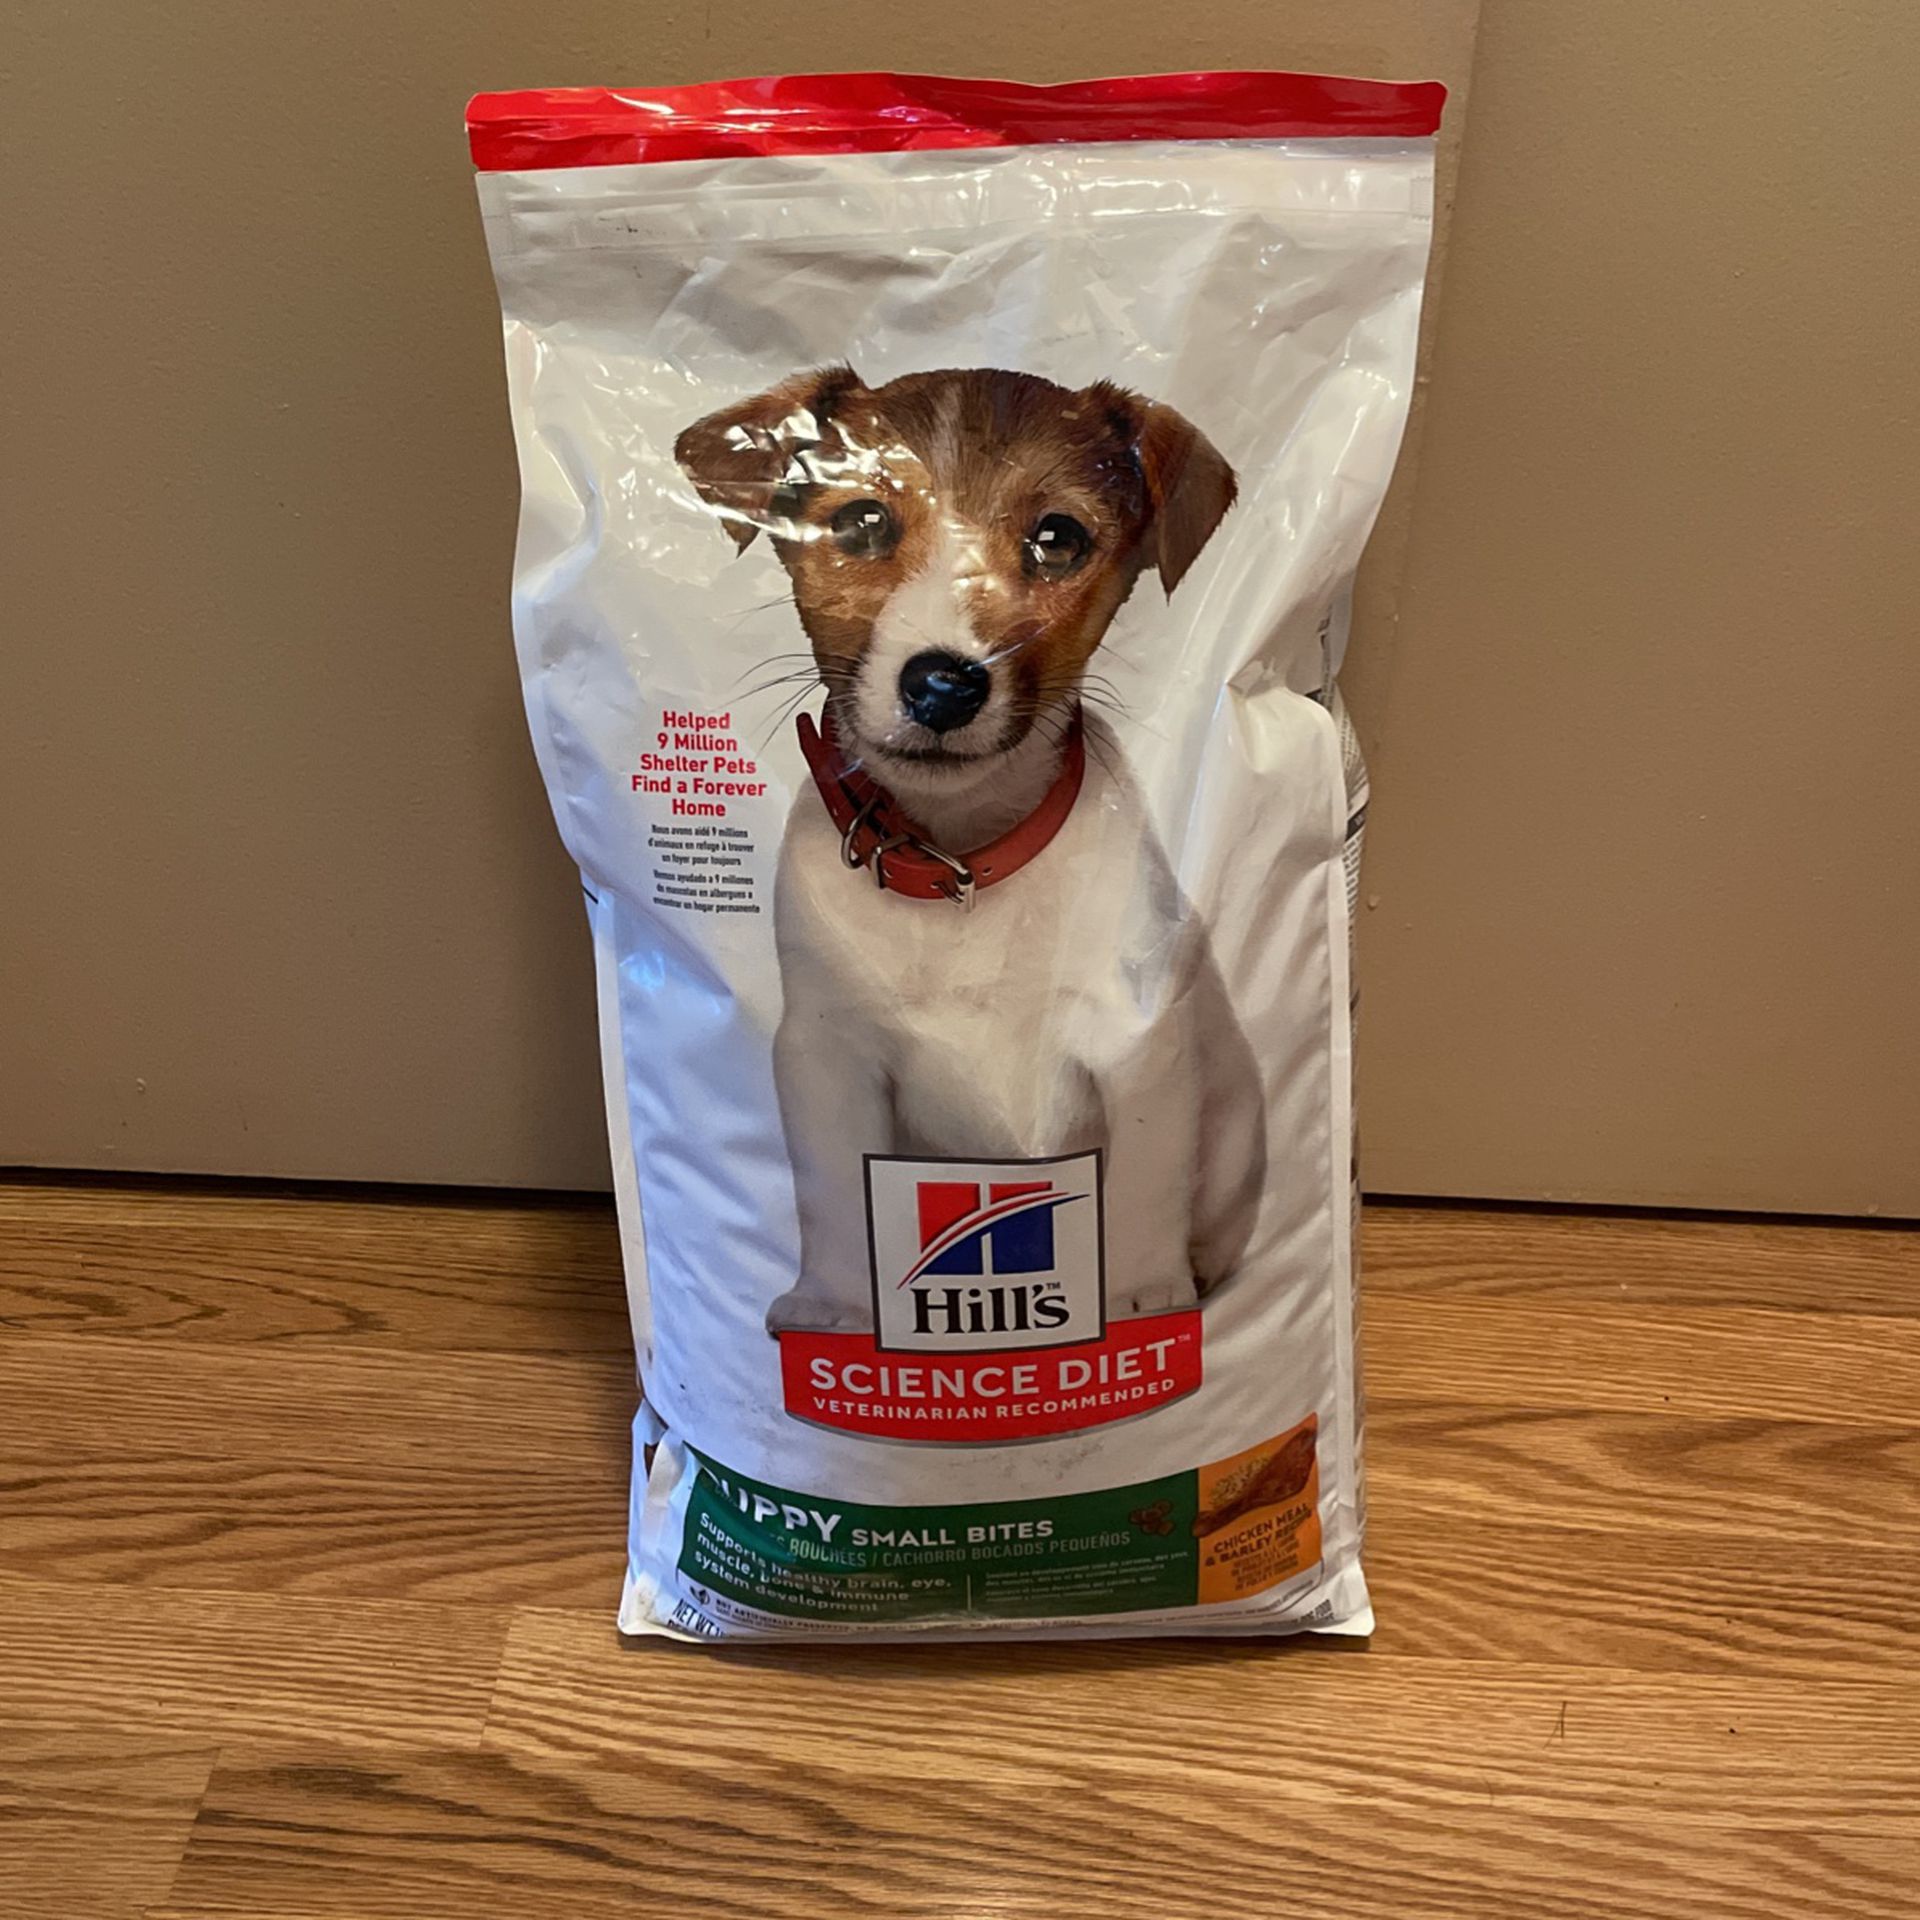 Hill’s Science Diet Puppy Food 